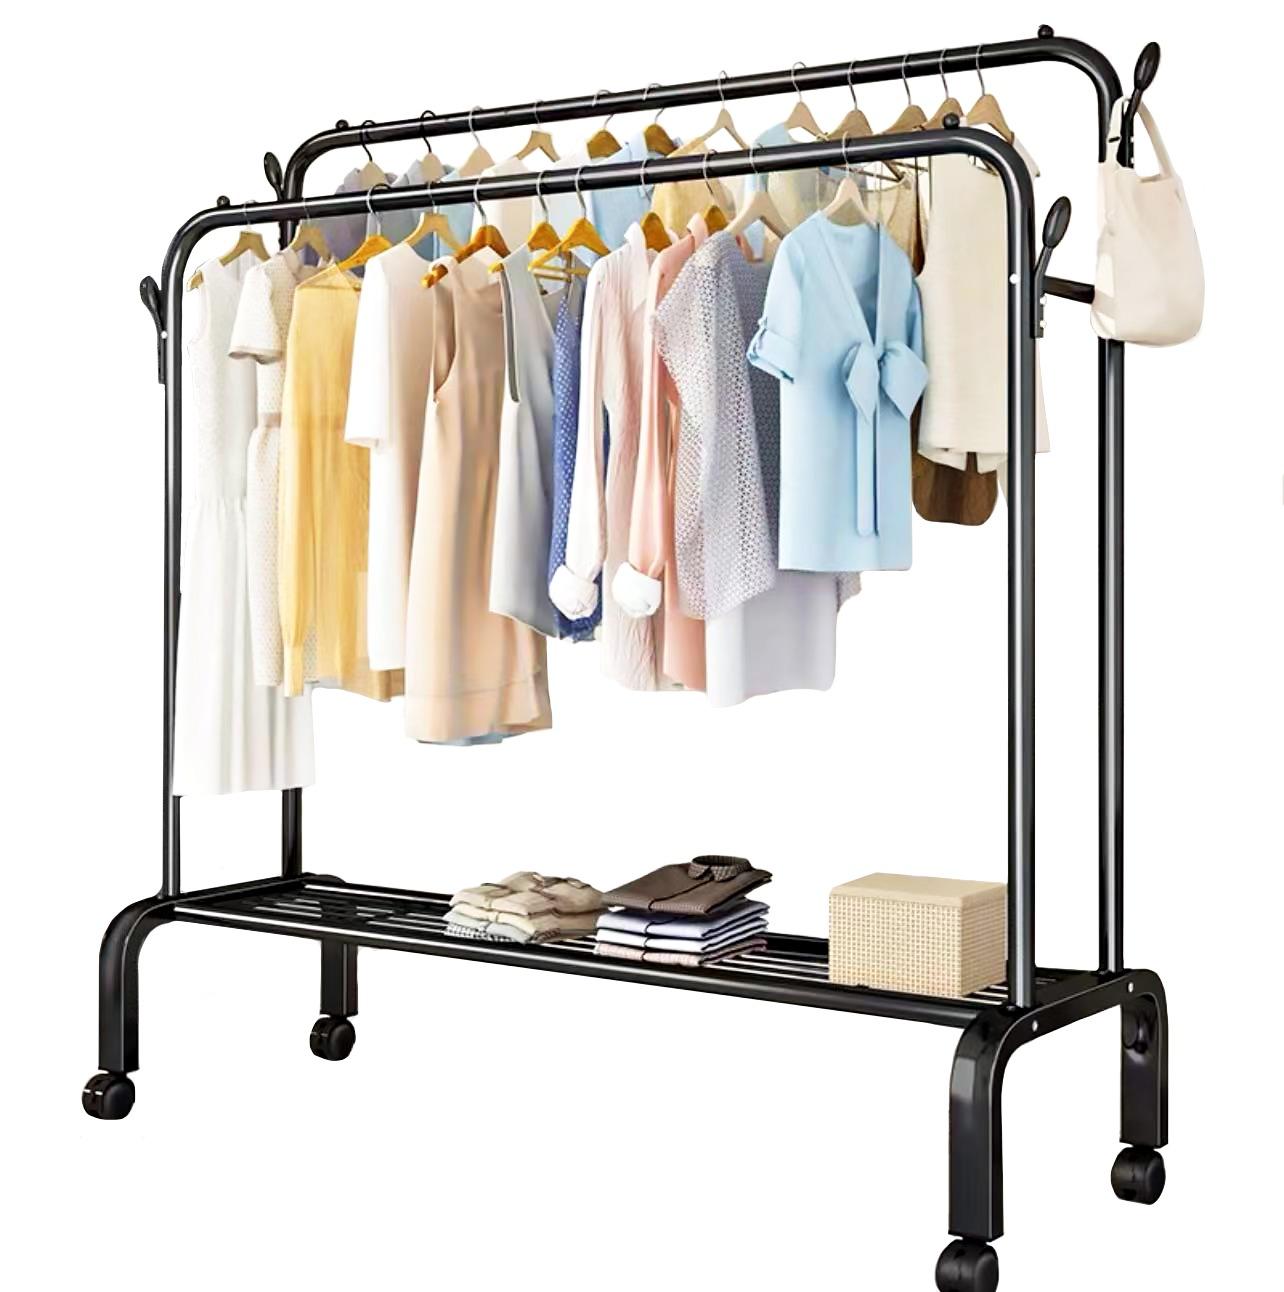 Multifunctional free-standing clothes hanger 150x154cm - black